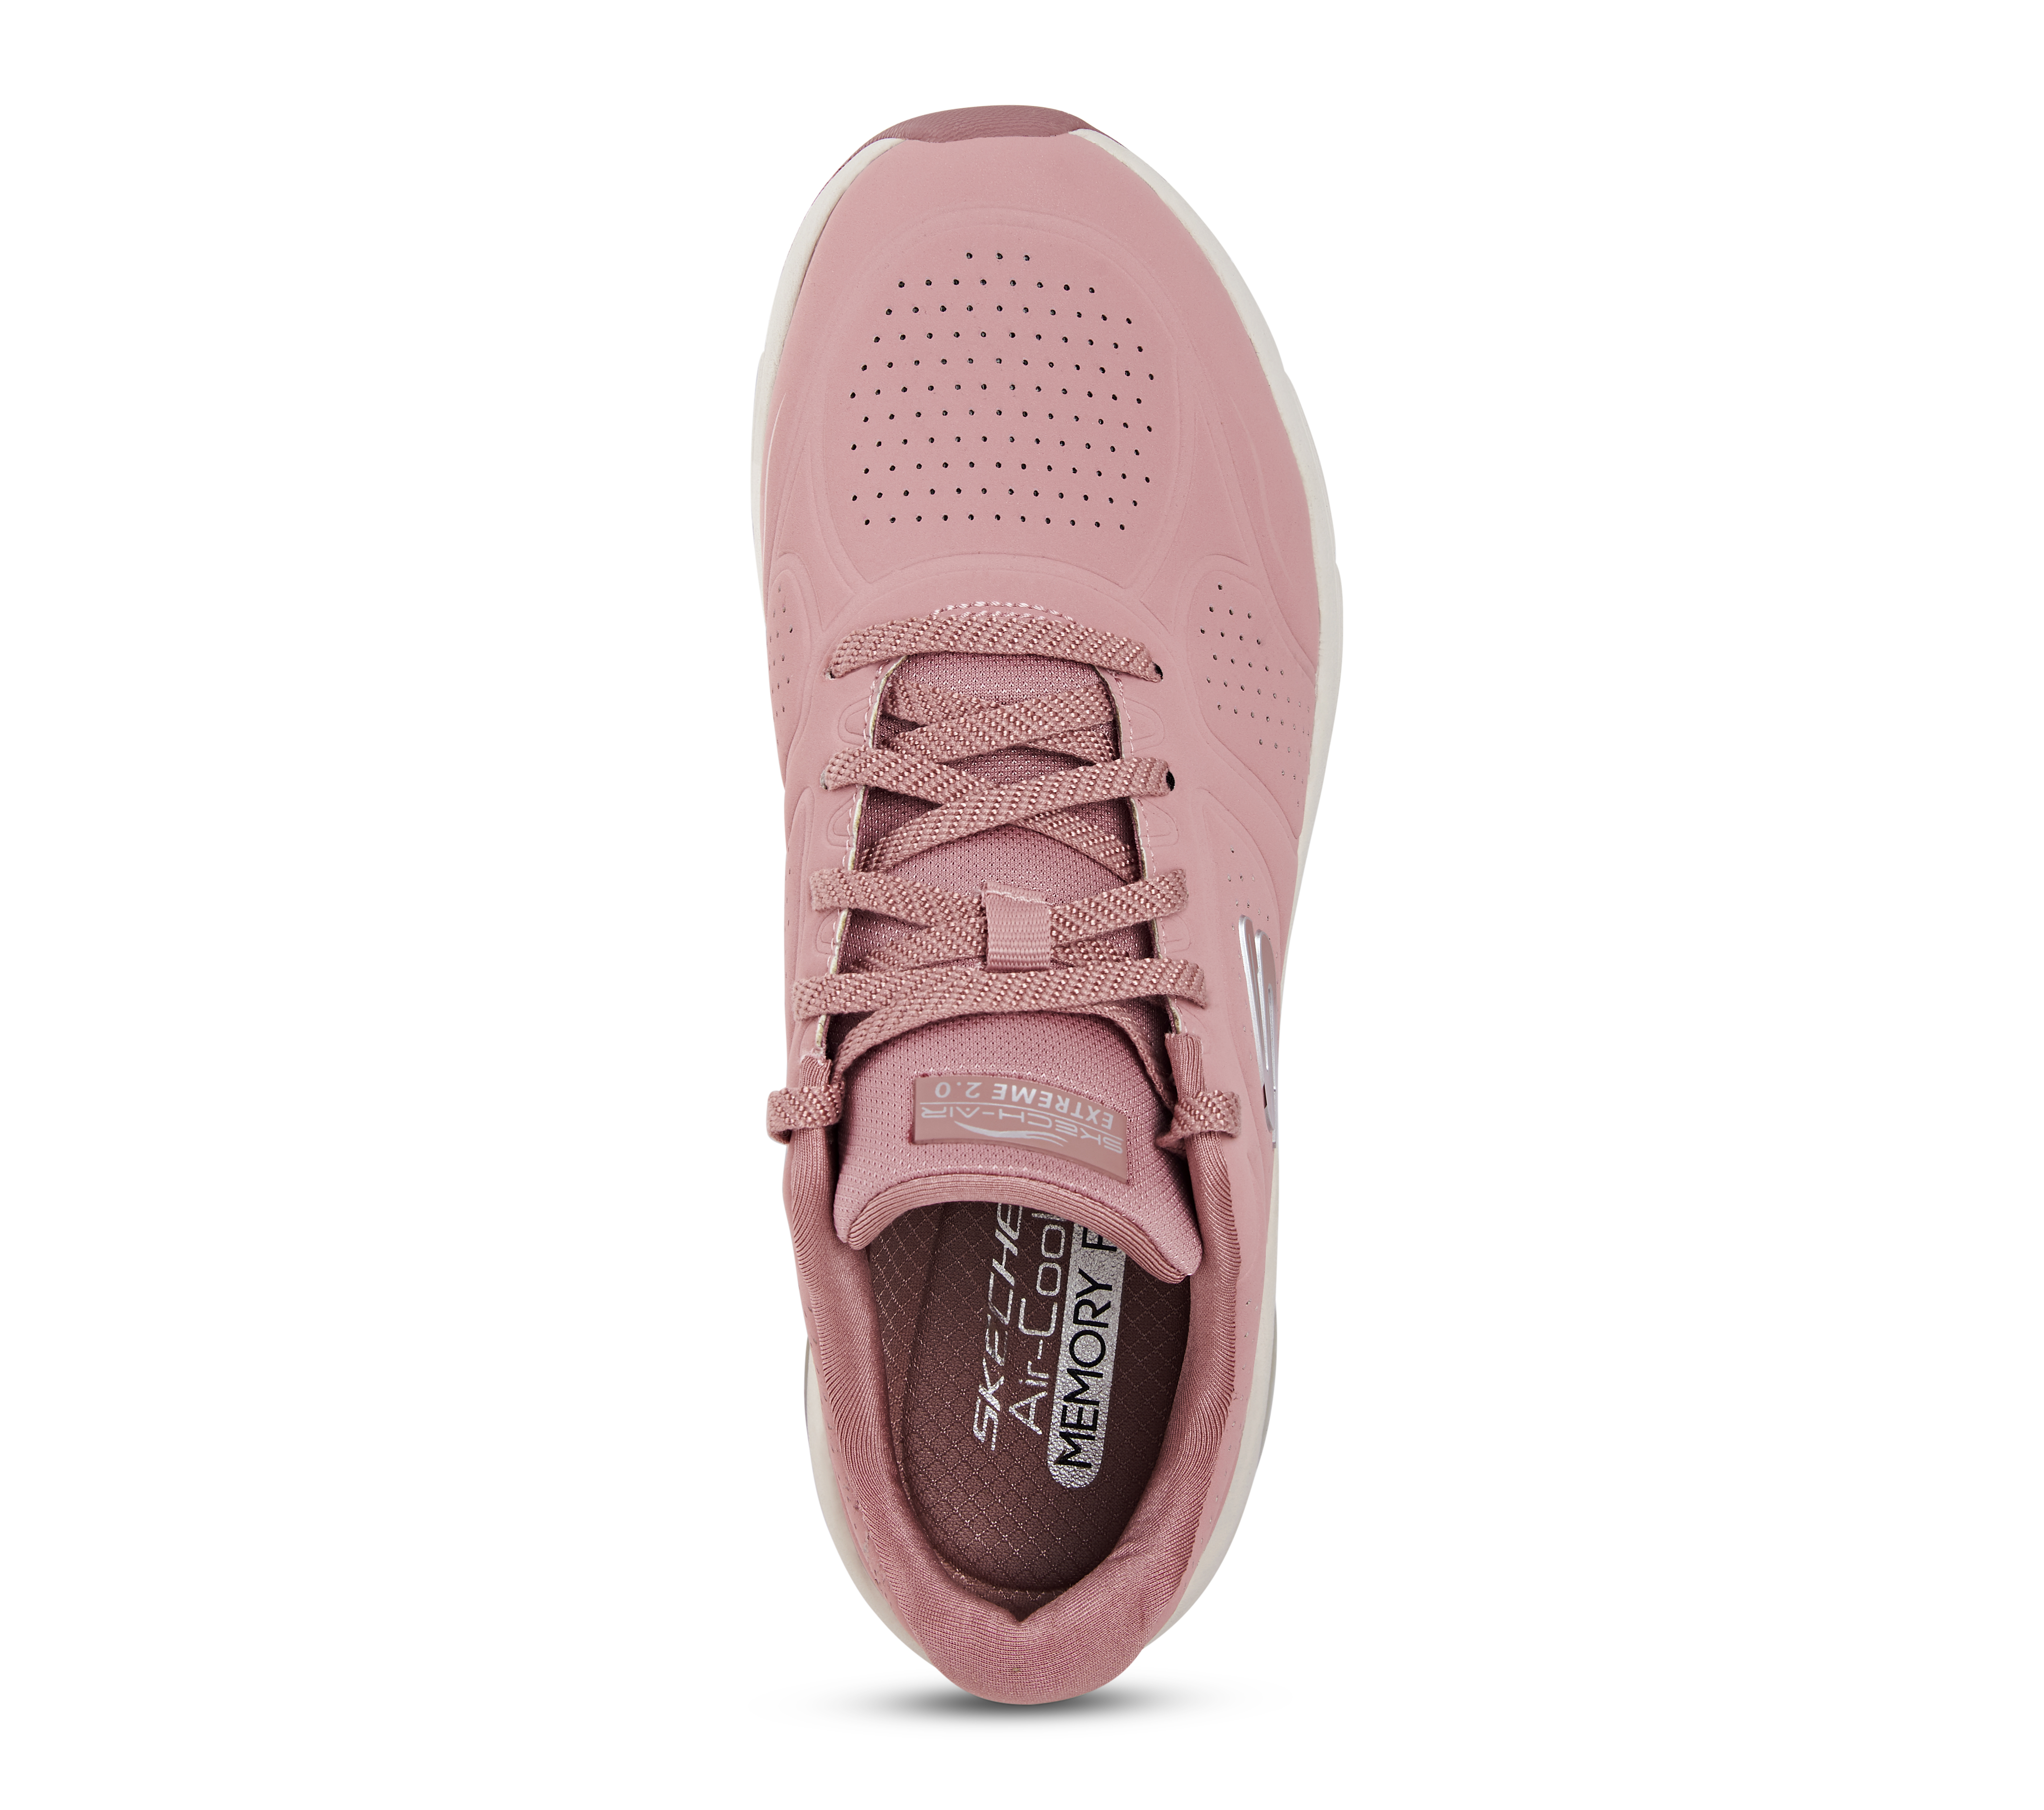 SKECH-AIR EXTREME 2.0-CLASSIC, ROSE Footwear Top View